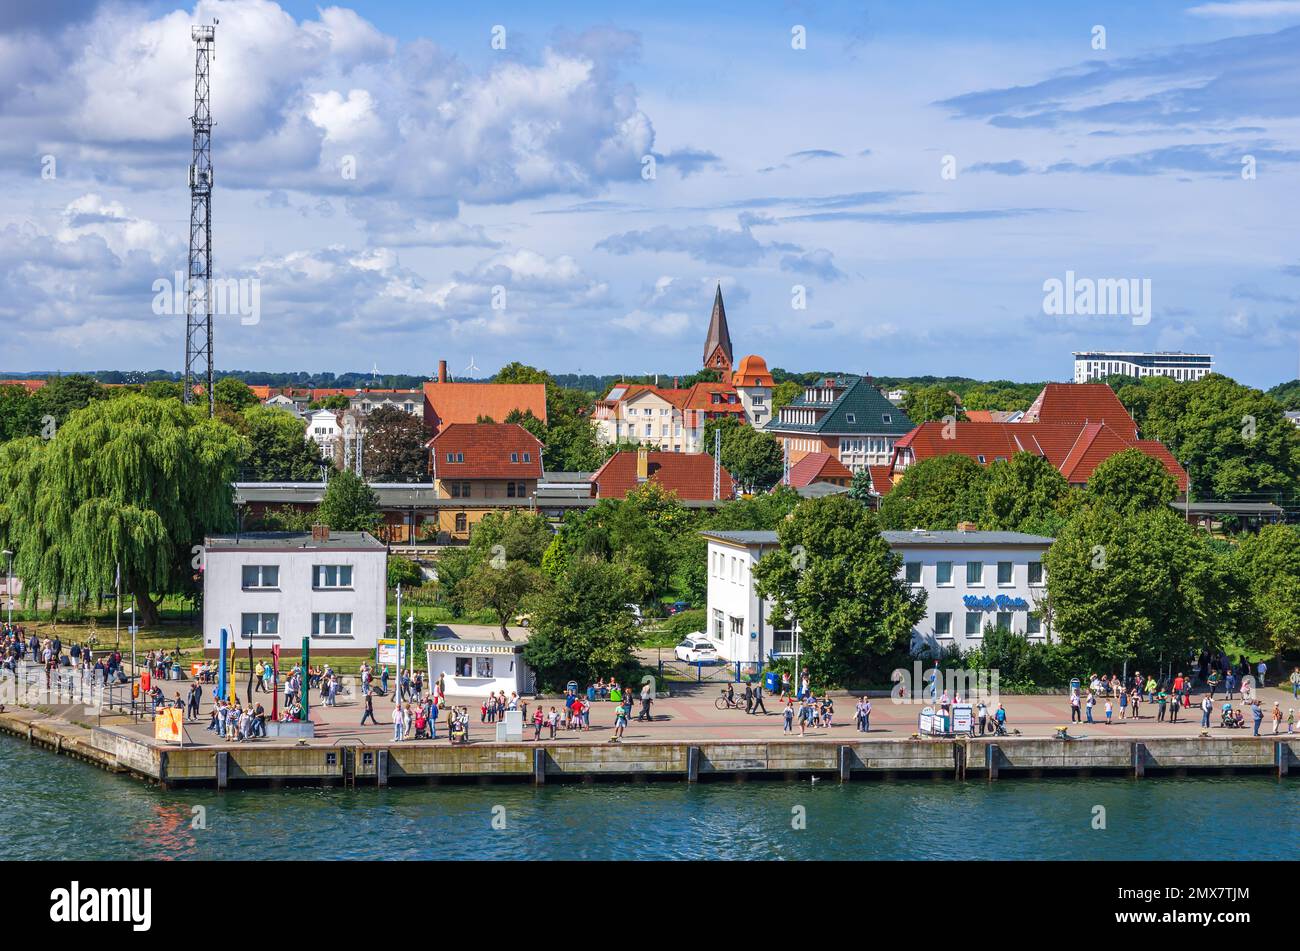 Everyday scenery of crowded tourists at the West Pier during the summer season, Rostock-Warnemunde, Mecklenburg-Western Pomerania, Germany, Europe. Stock Photo